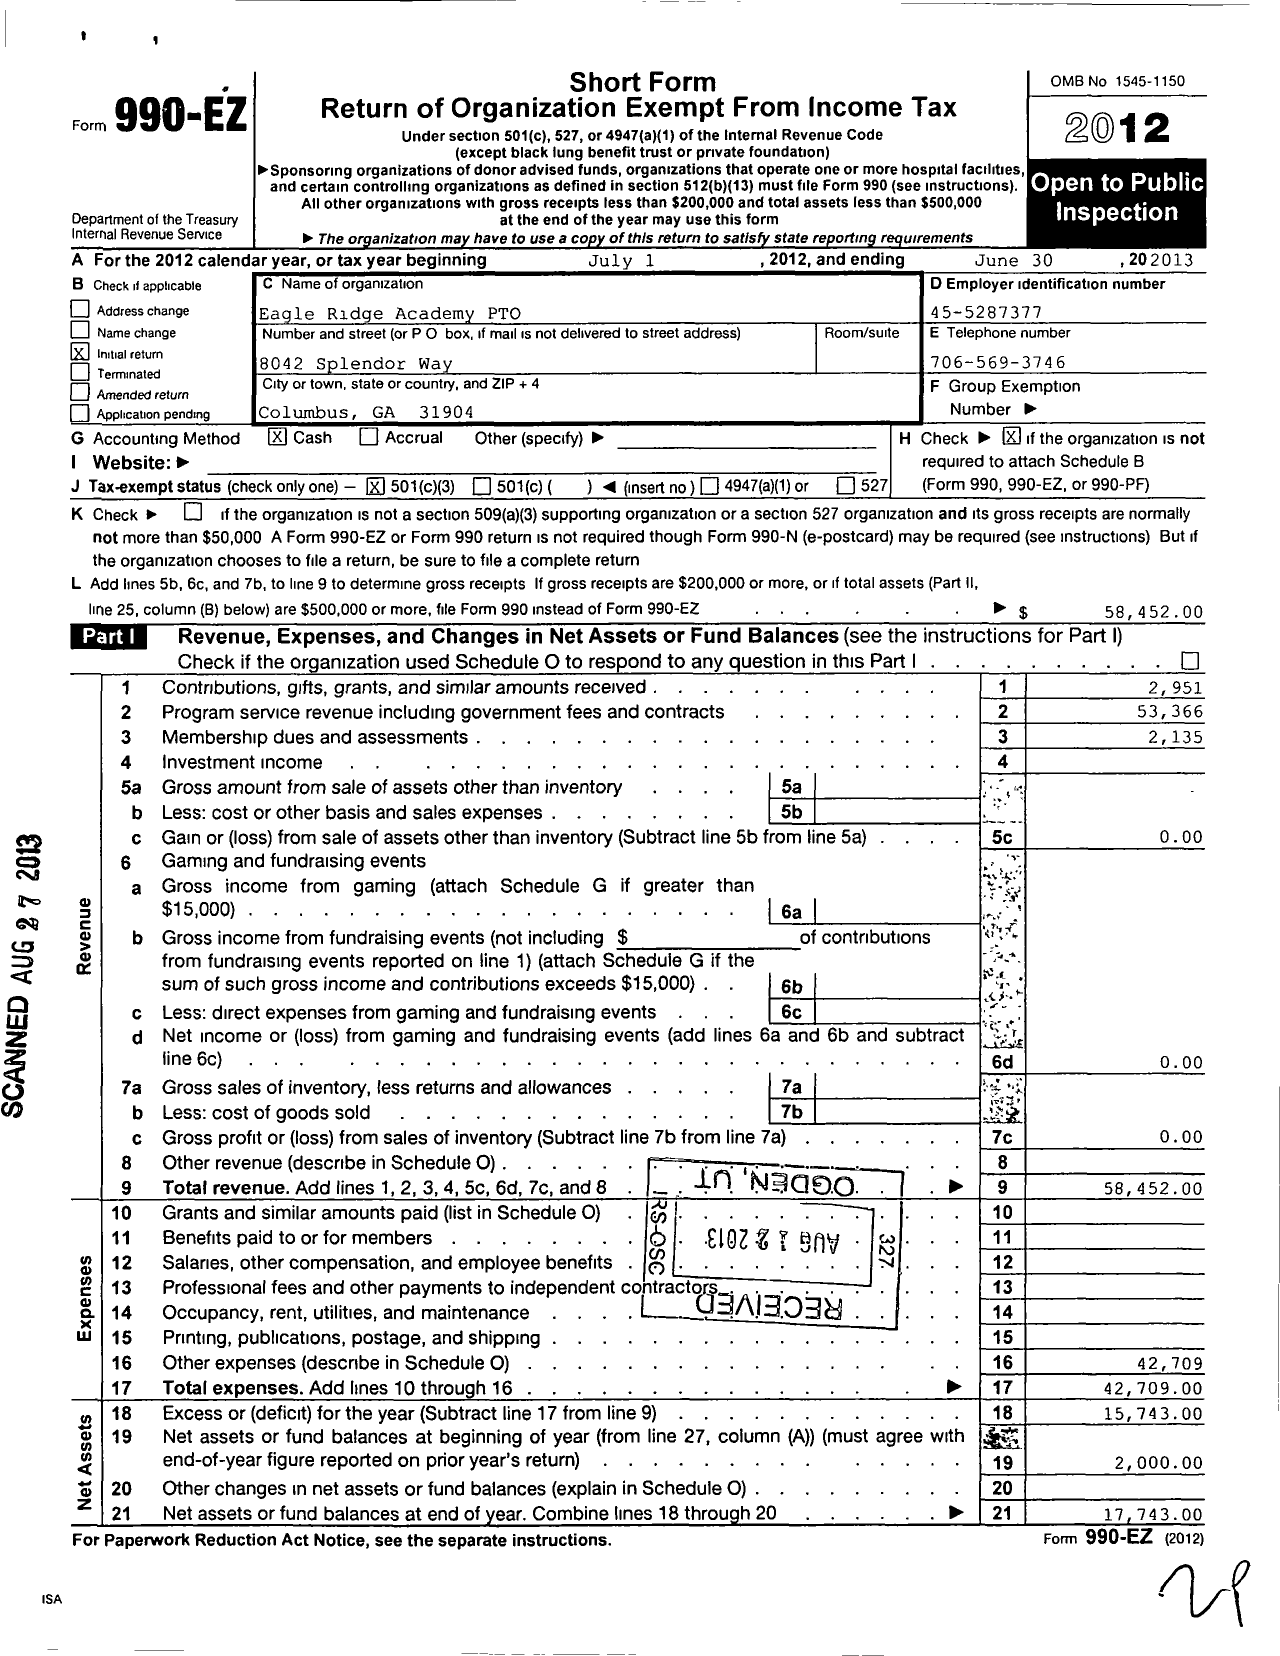 Image of first page of 2012 Form 990EZ for Eagle Ridge Academy Pto